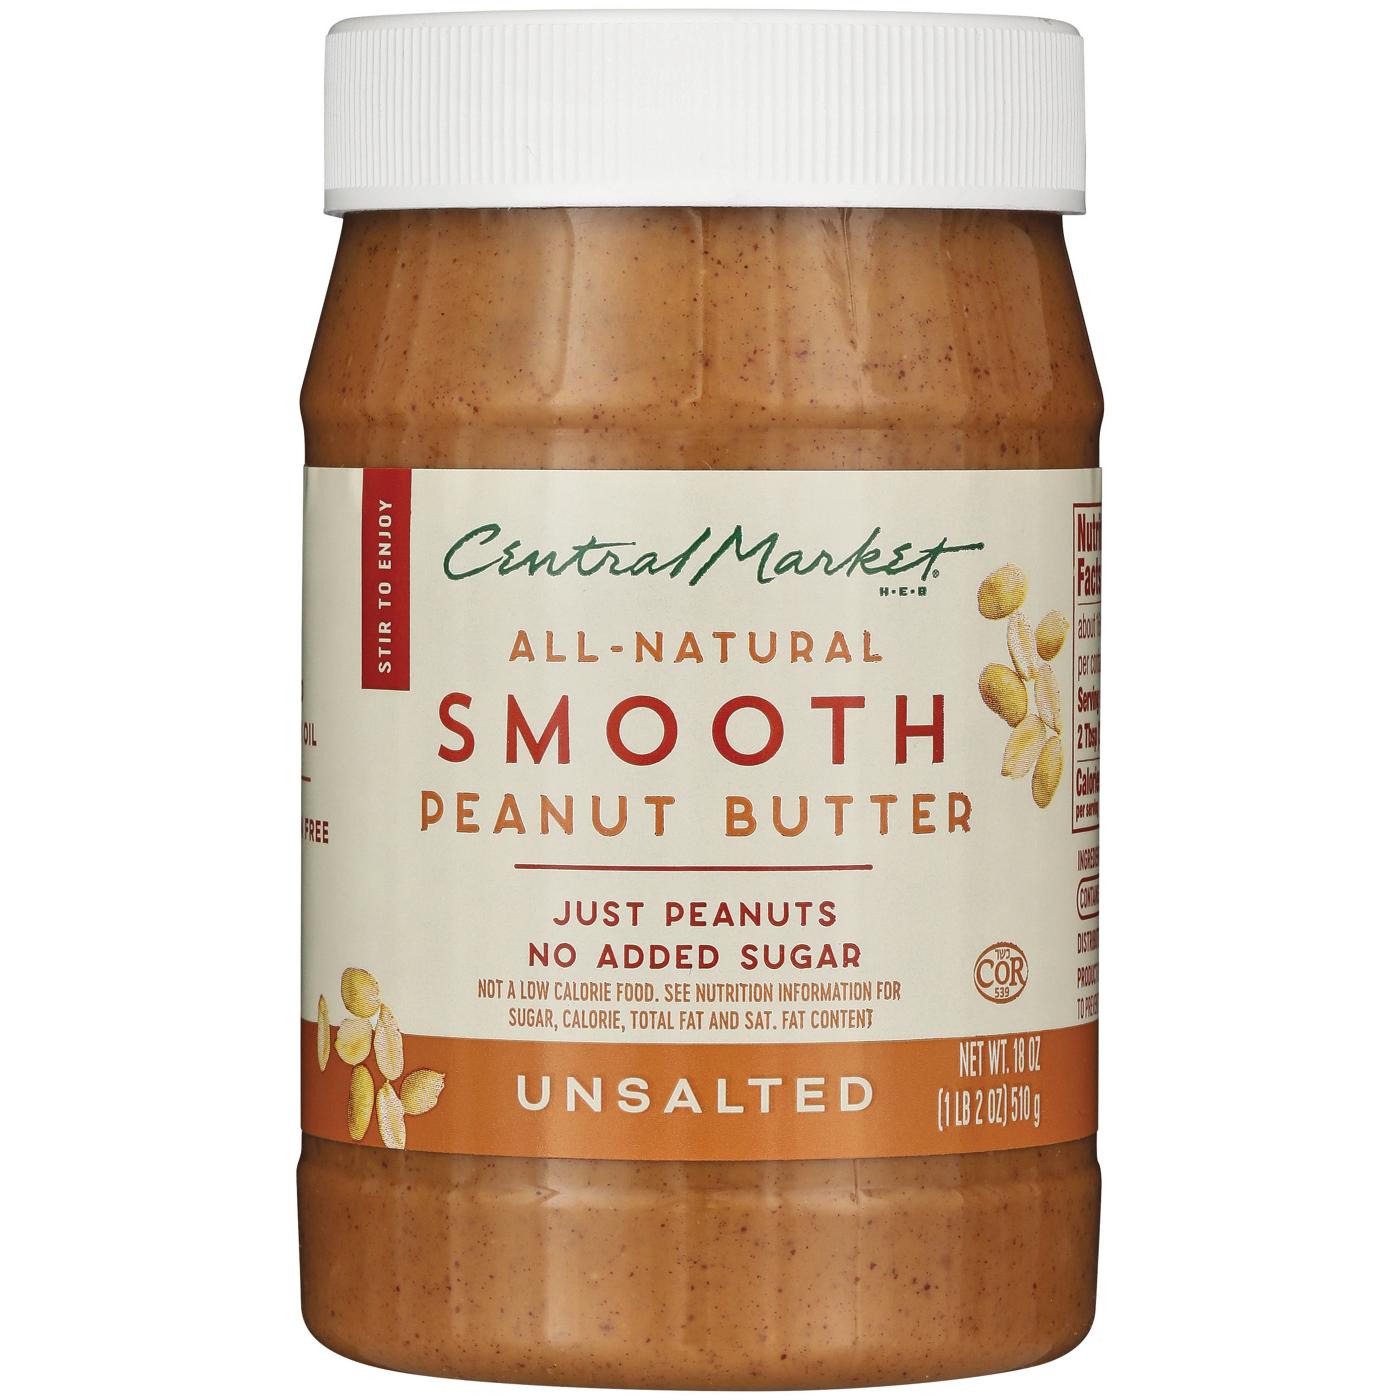 Central Market All-Natural Smooth Peanut Butter - Unsalted; image 1 of 2